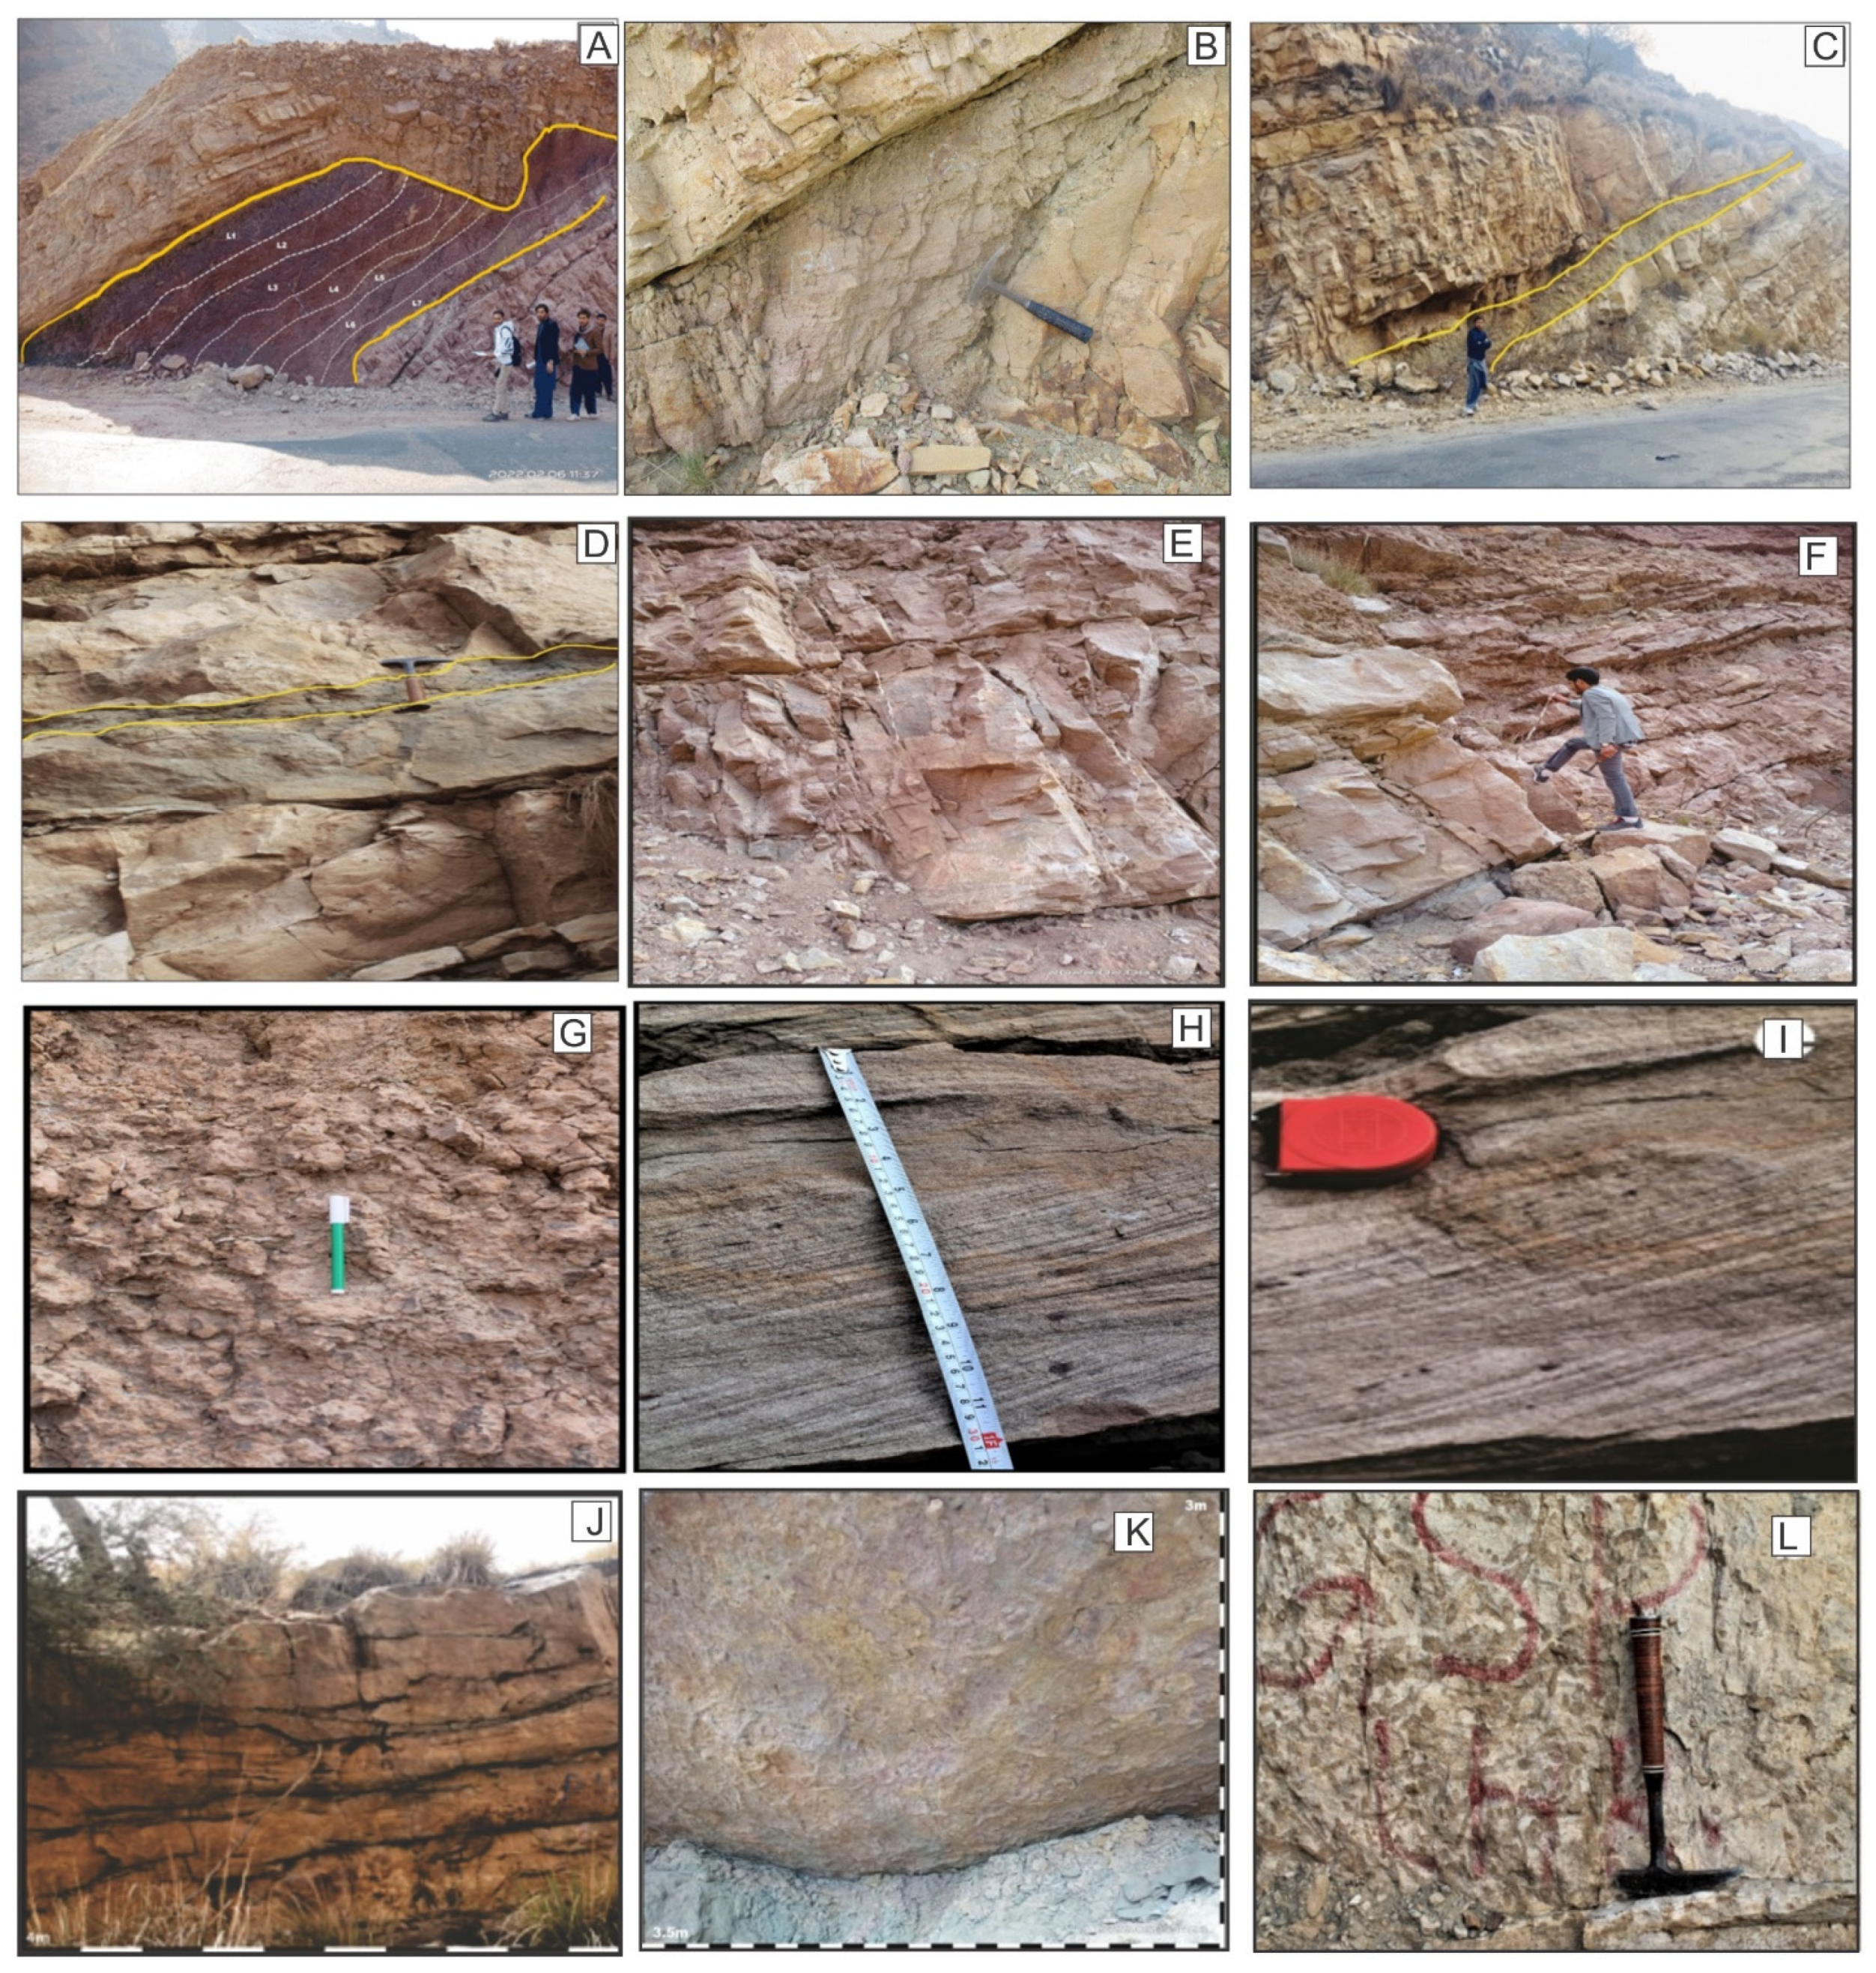 Facies within the Earlie Formation. A) Interbedded sandstone and